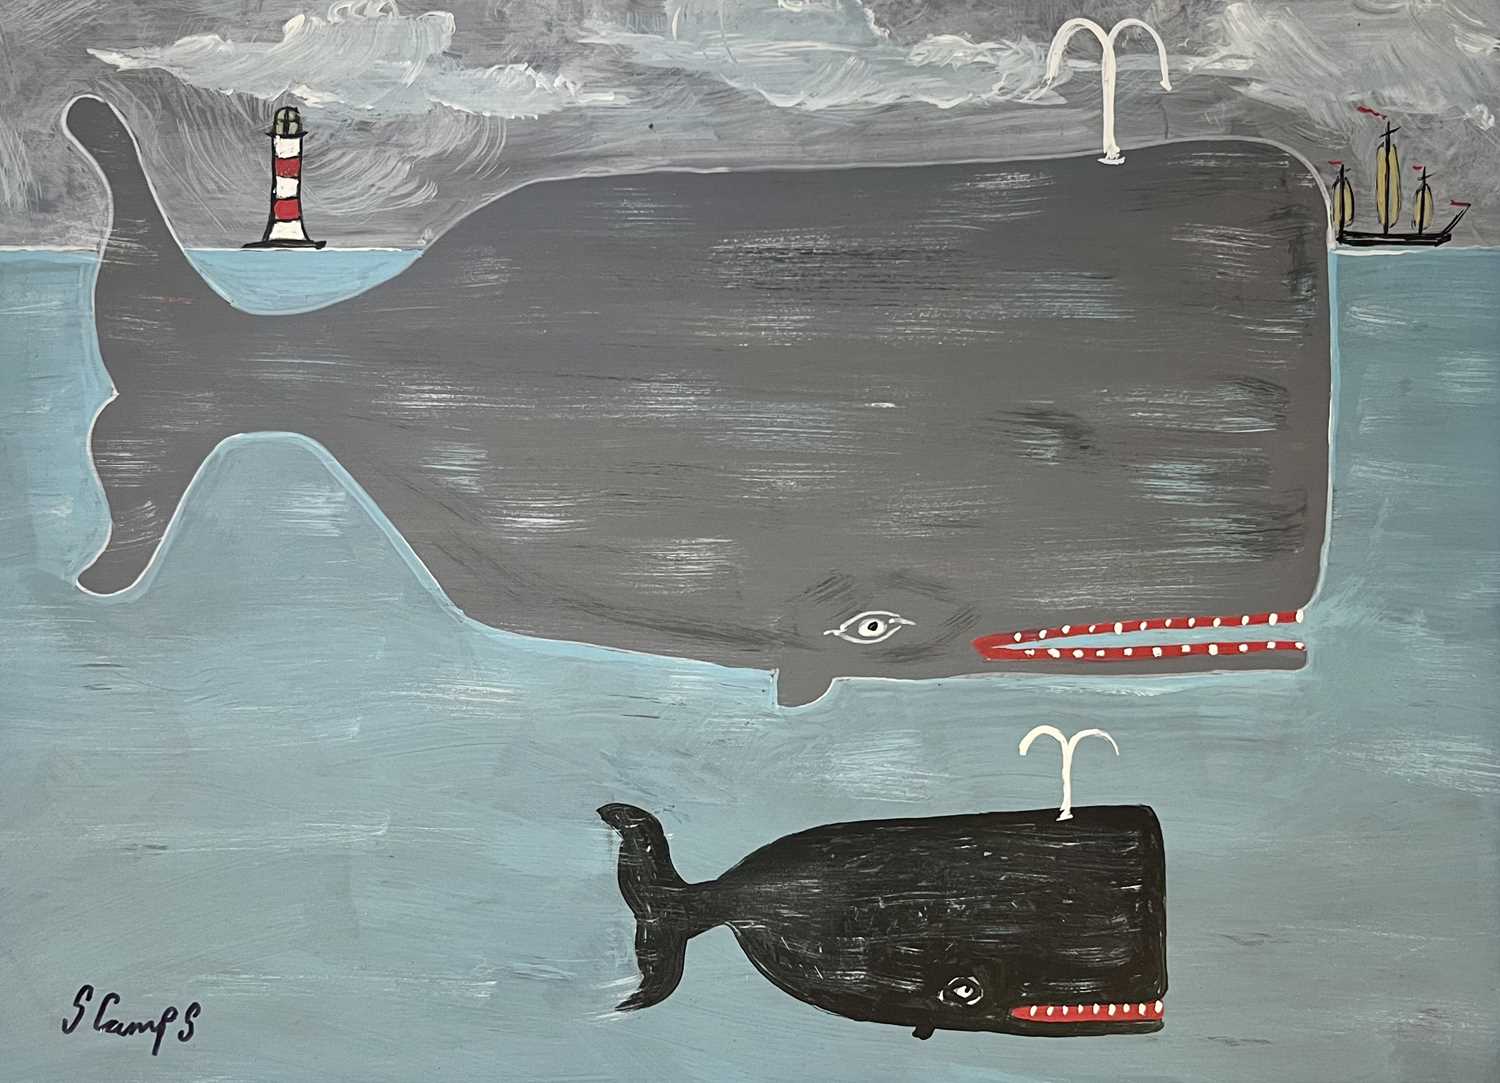 Stephen CAMPS aka Scamps (Cornish Naïve School, 1957) Two Whales, A Lighthouse And A Boat